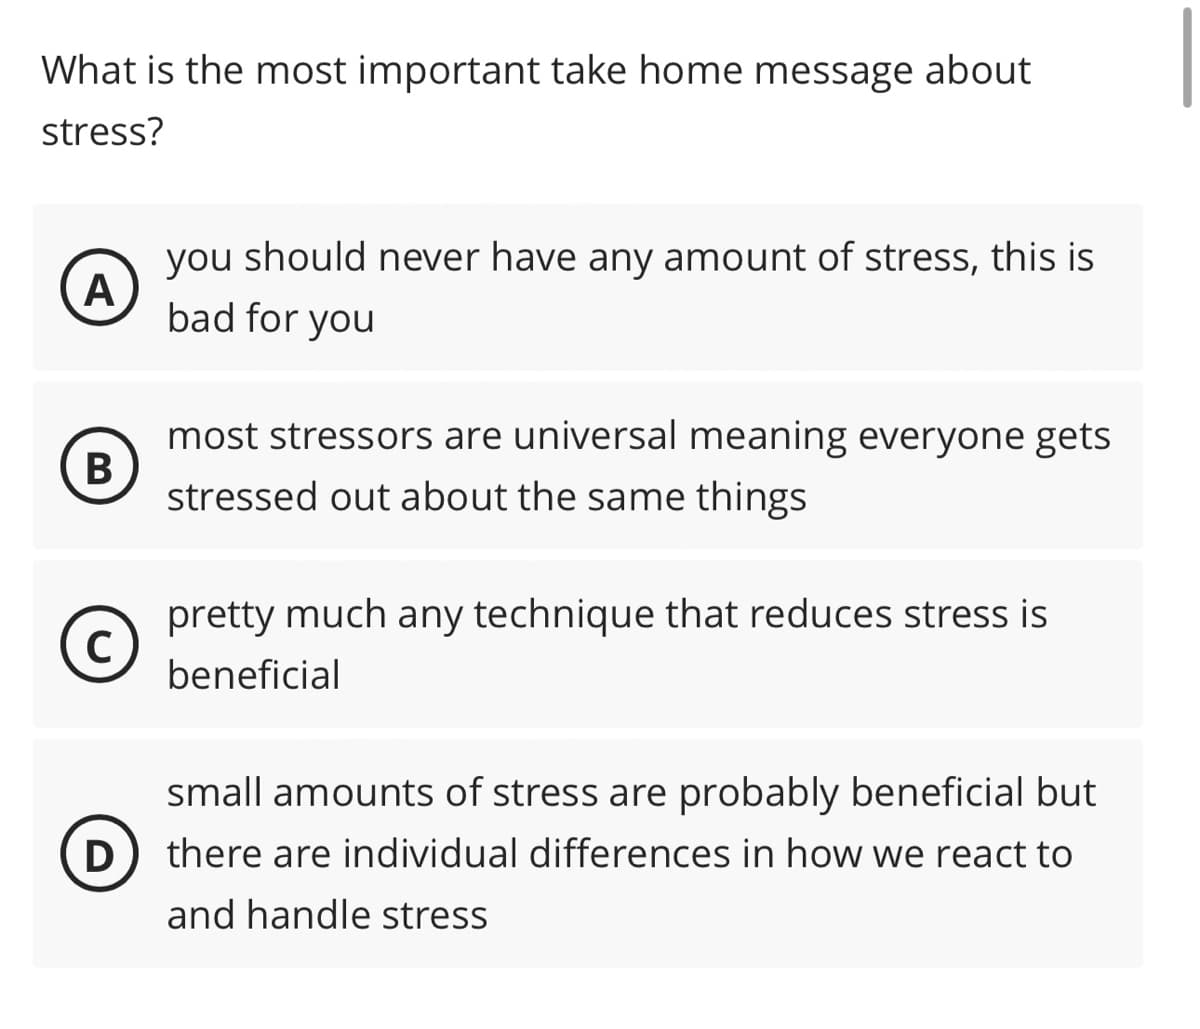 What is the most important take home message about
stress?
A
you should never have any amount of stress, this is
bad for you
B
с
most stressors are universal meaning everyone gets
stressed out about the same things
pretty much any technique that reduces stress is
beneficial
small amounts of stress are probably beneficial but
D) there are individual differences in how we react to
and handle stress